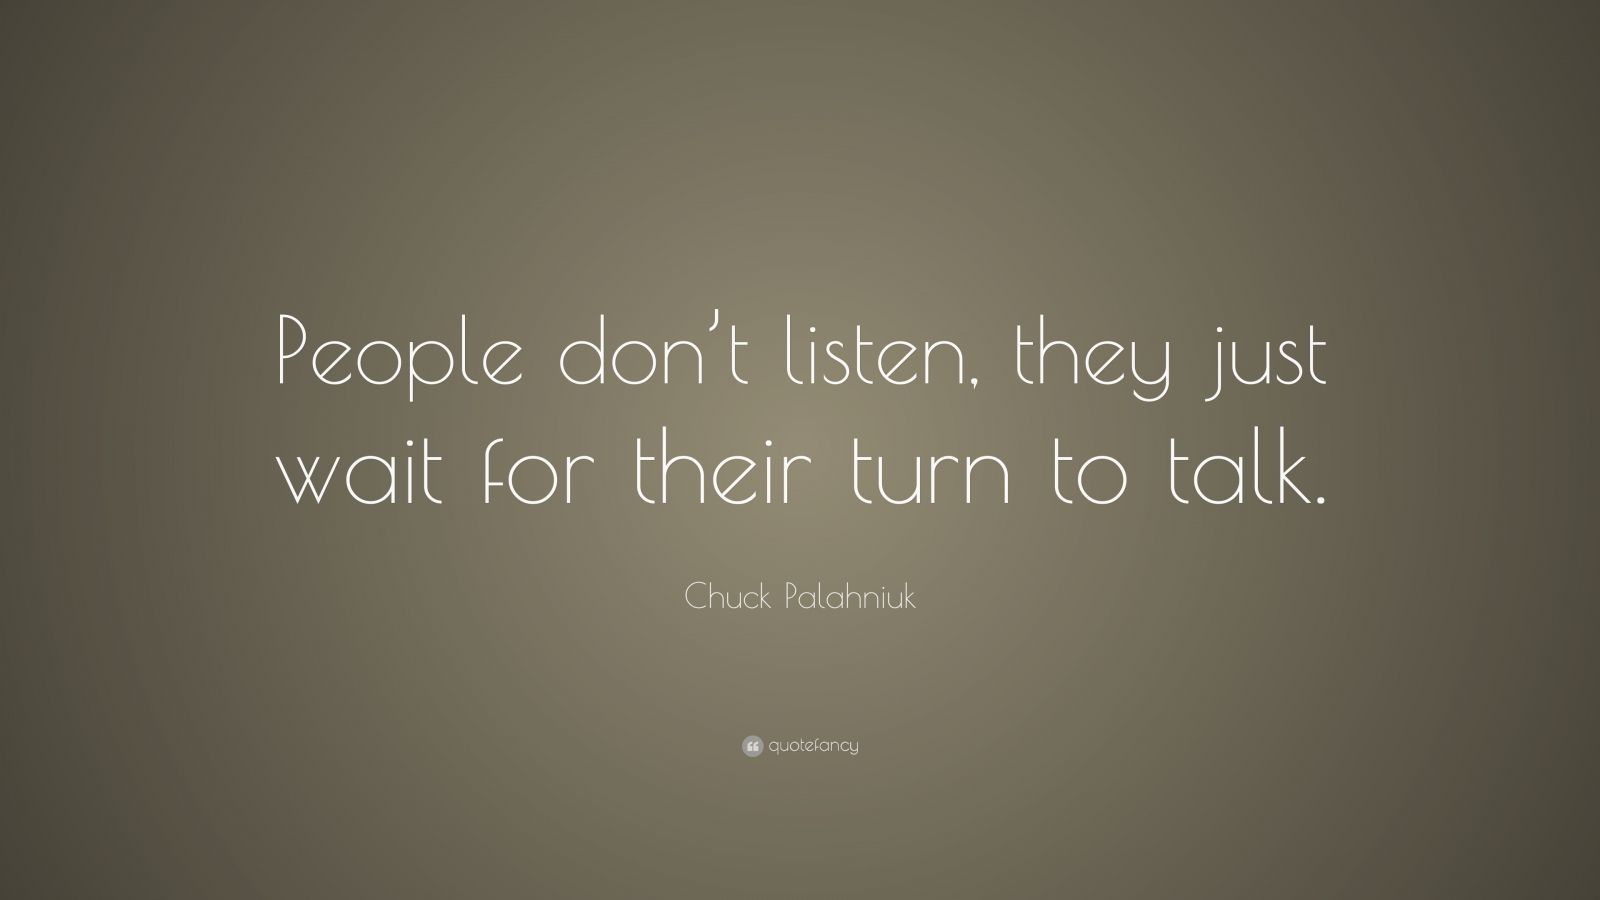 Chuck Palahniuk Quote: “People don’t listen, they just wait for their ...